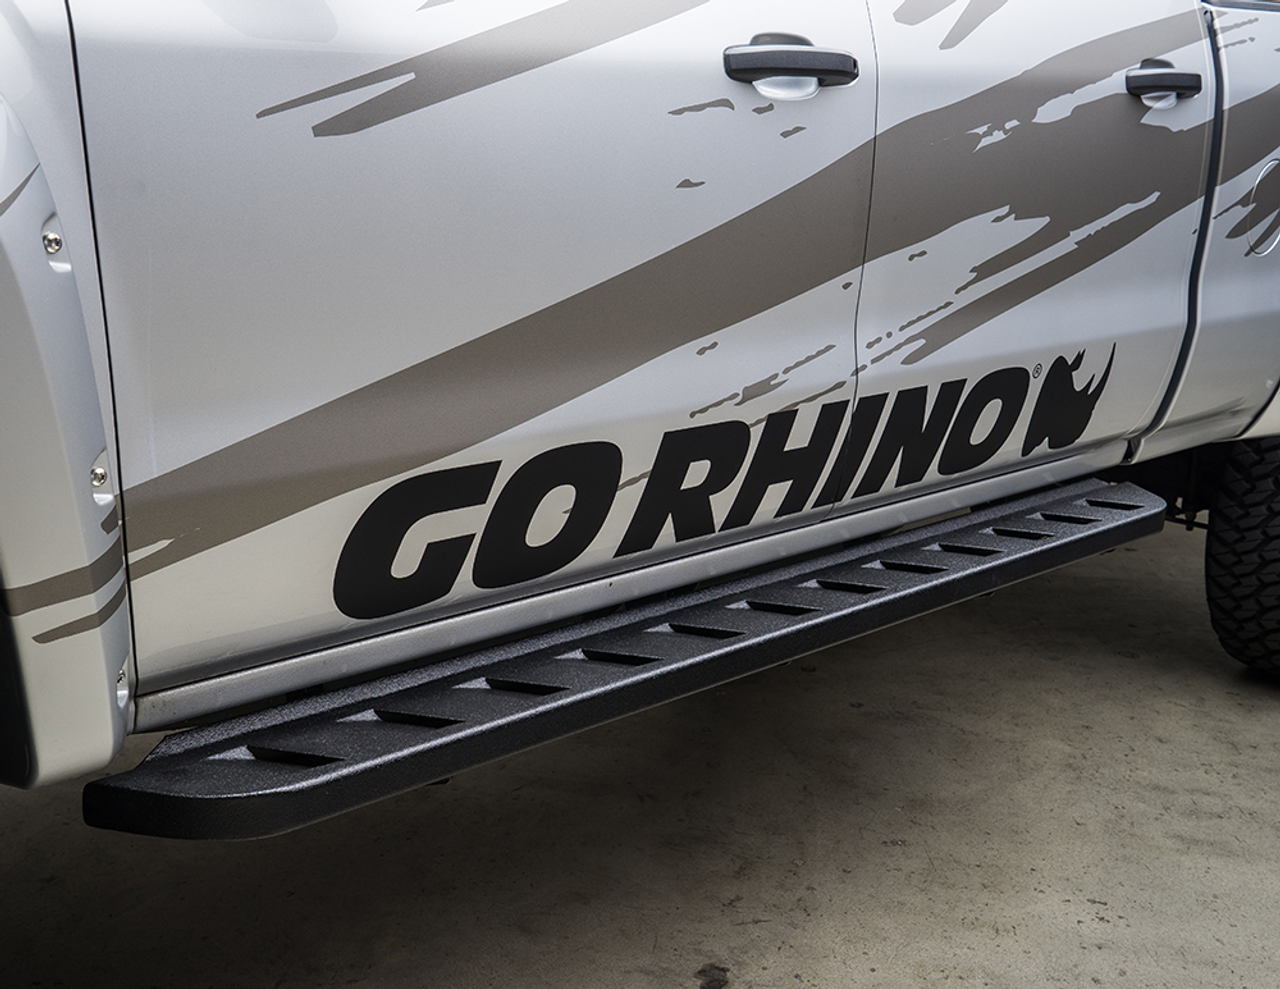 Go Rhino 6343068720PC RAM, 1500, 2019 - 2021, RB10 Running boards - Complete Kit:  2 pair RB10 Drop Steps, Galvanized Steel, Textured black, 630087PC RB10 + 6343065 RB Brackets + (2) 69420000PC Drop Down Step, New Body Style Only